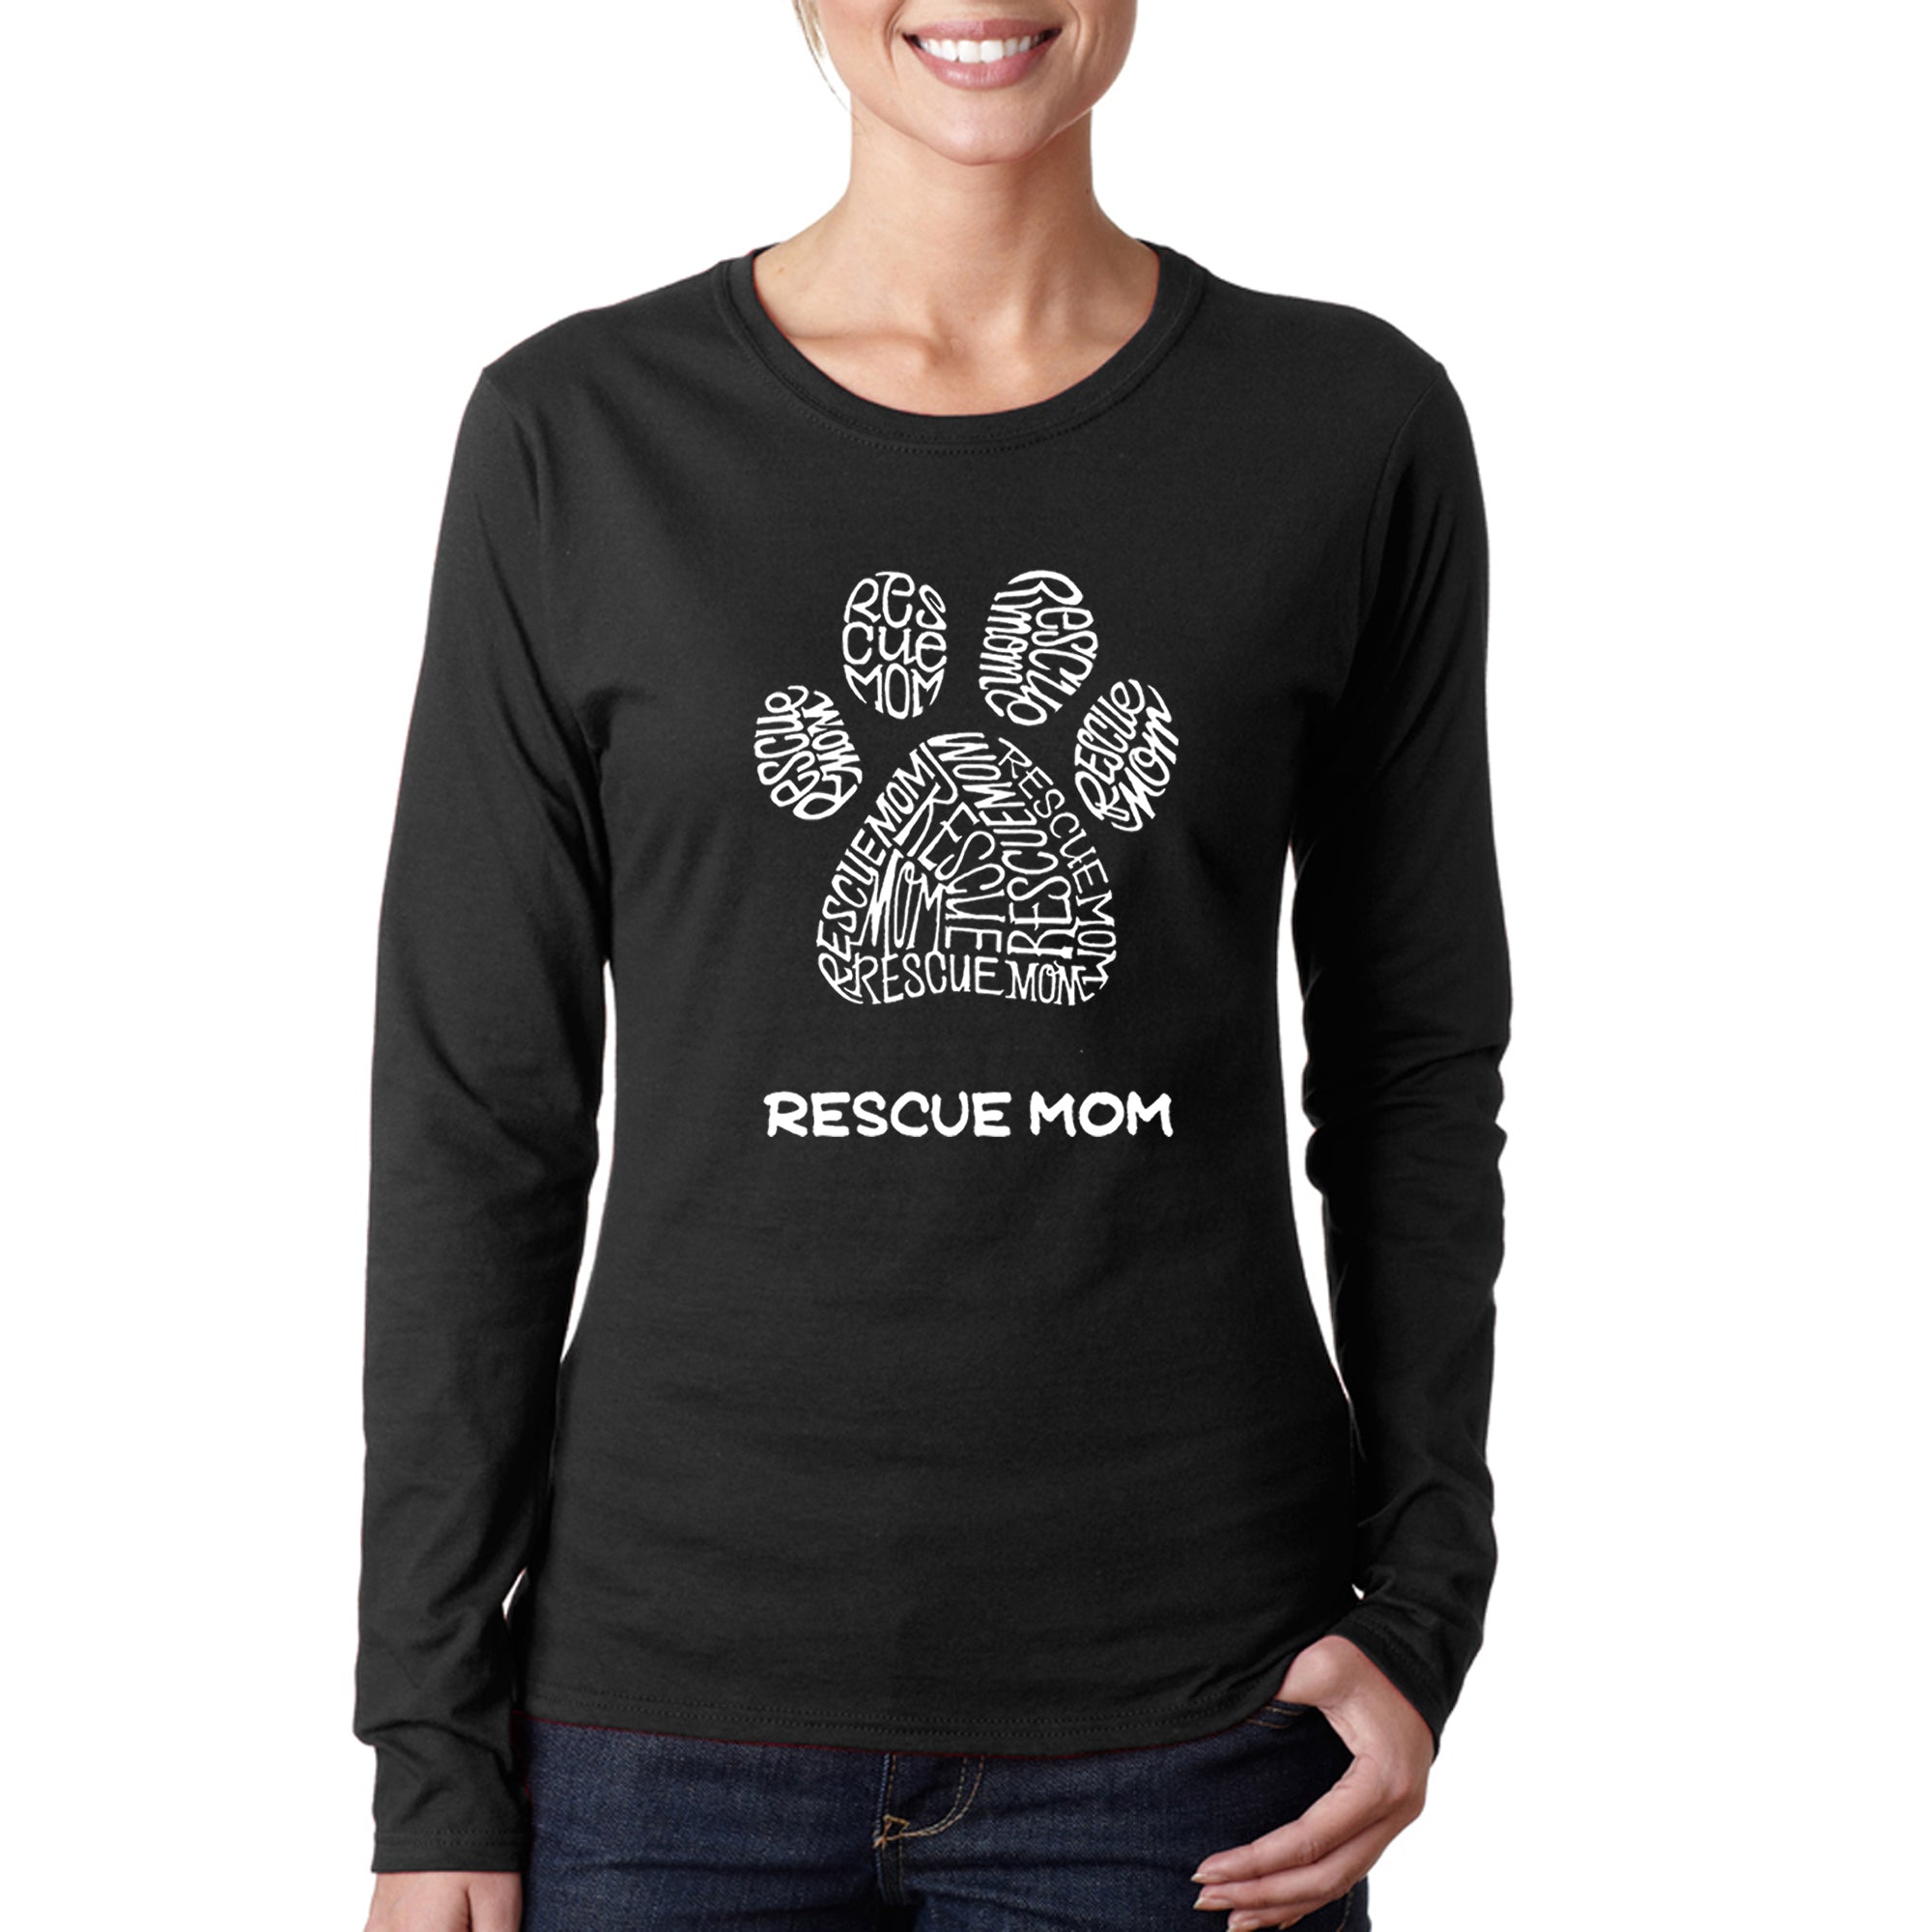 Rescue Mom - Women's Word Art Long Sleeve T-Shirt - Pink - Large